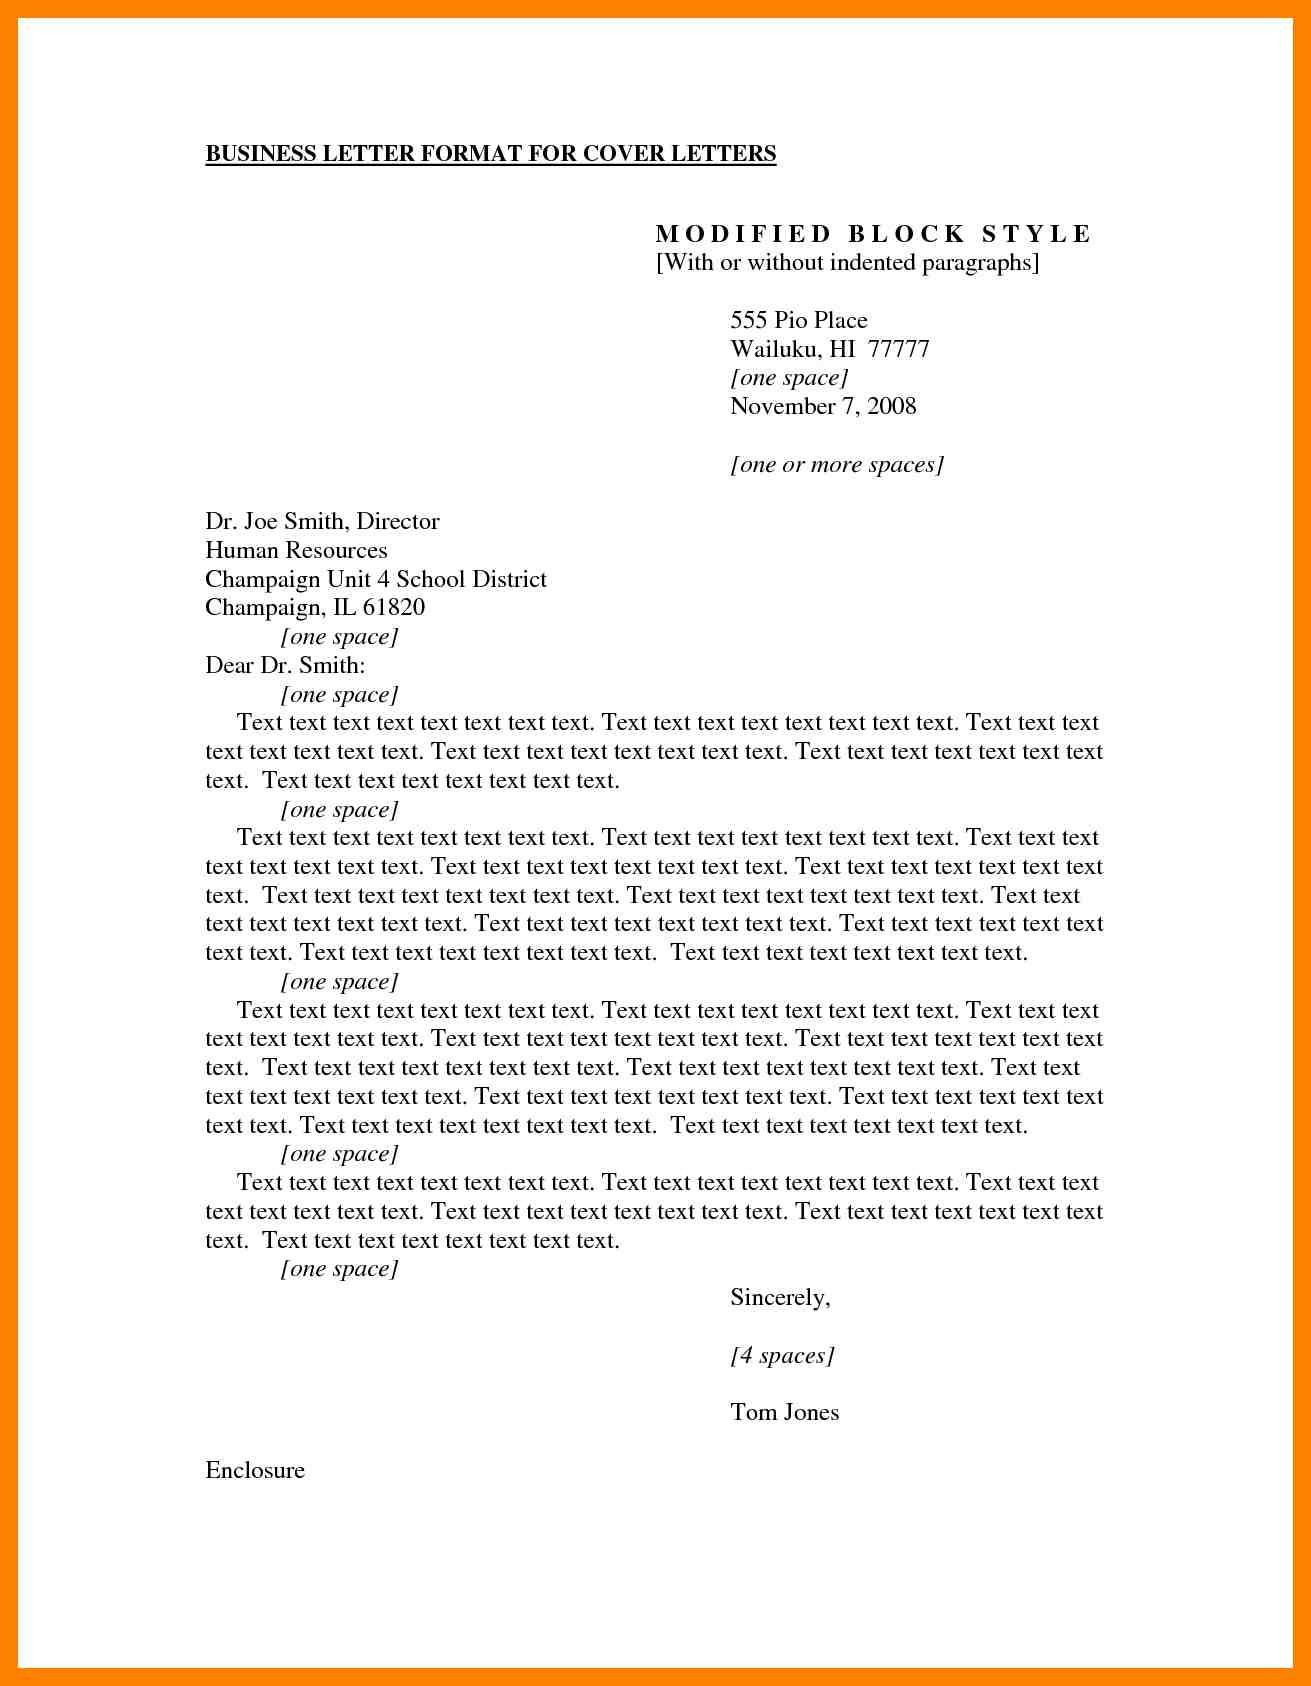 copy of a business letter Boat.jeremyeaton.co